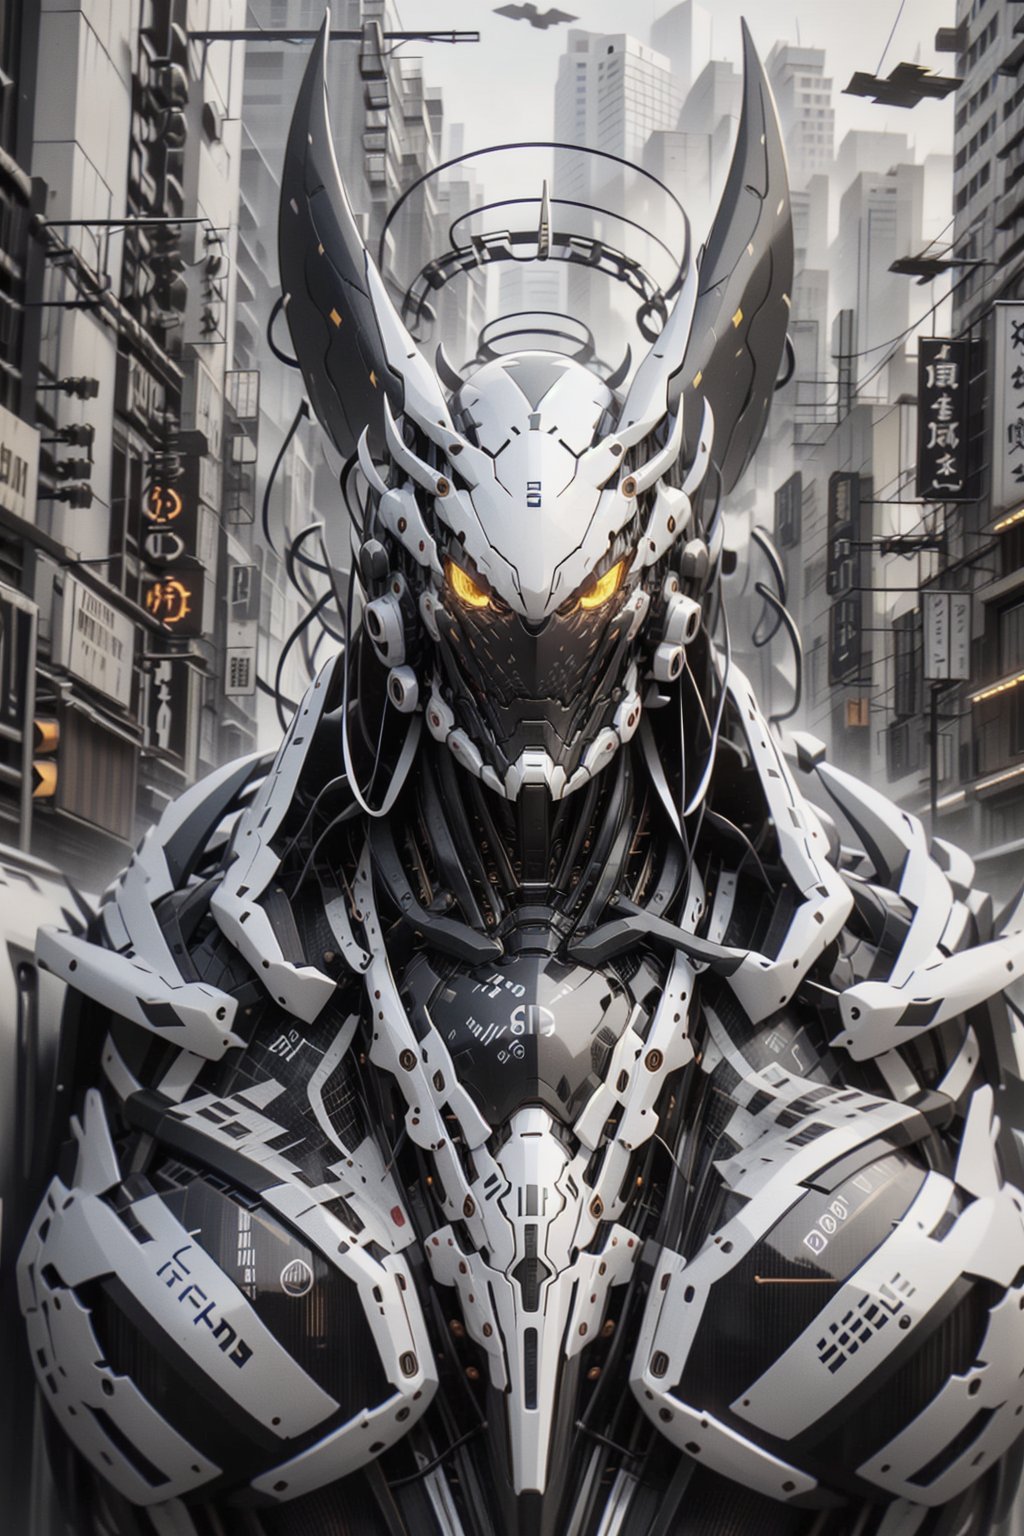 an image of a demon with a sword, sexy muscular body, greek god in mecha style, huge horns, very symmetrical body, cg art, face of an armored villian, adopt, by An Zhengwen, father figure image, also symmetrical, barren, official print, characters merged, old skin,Sci Fi 